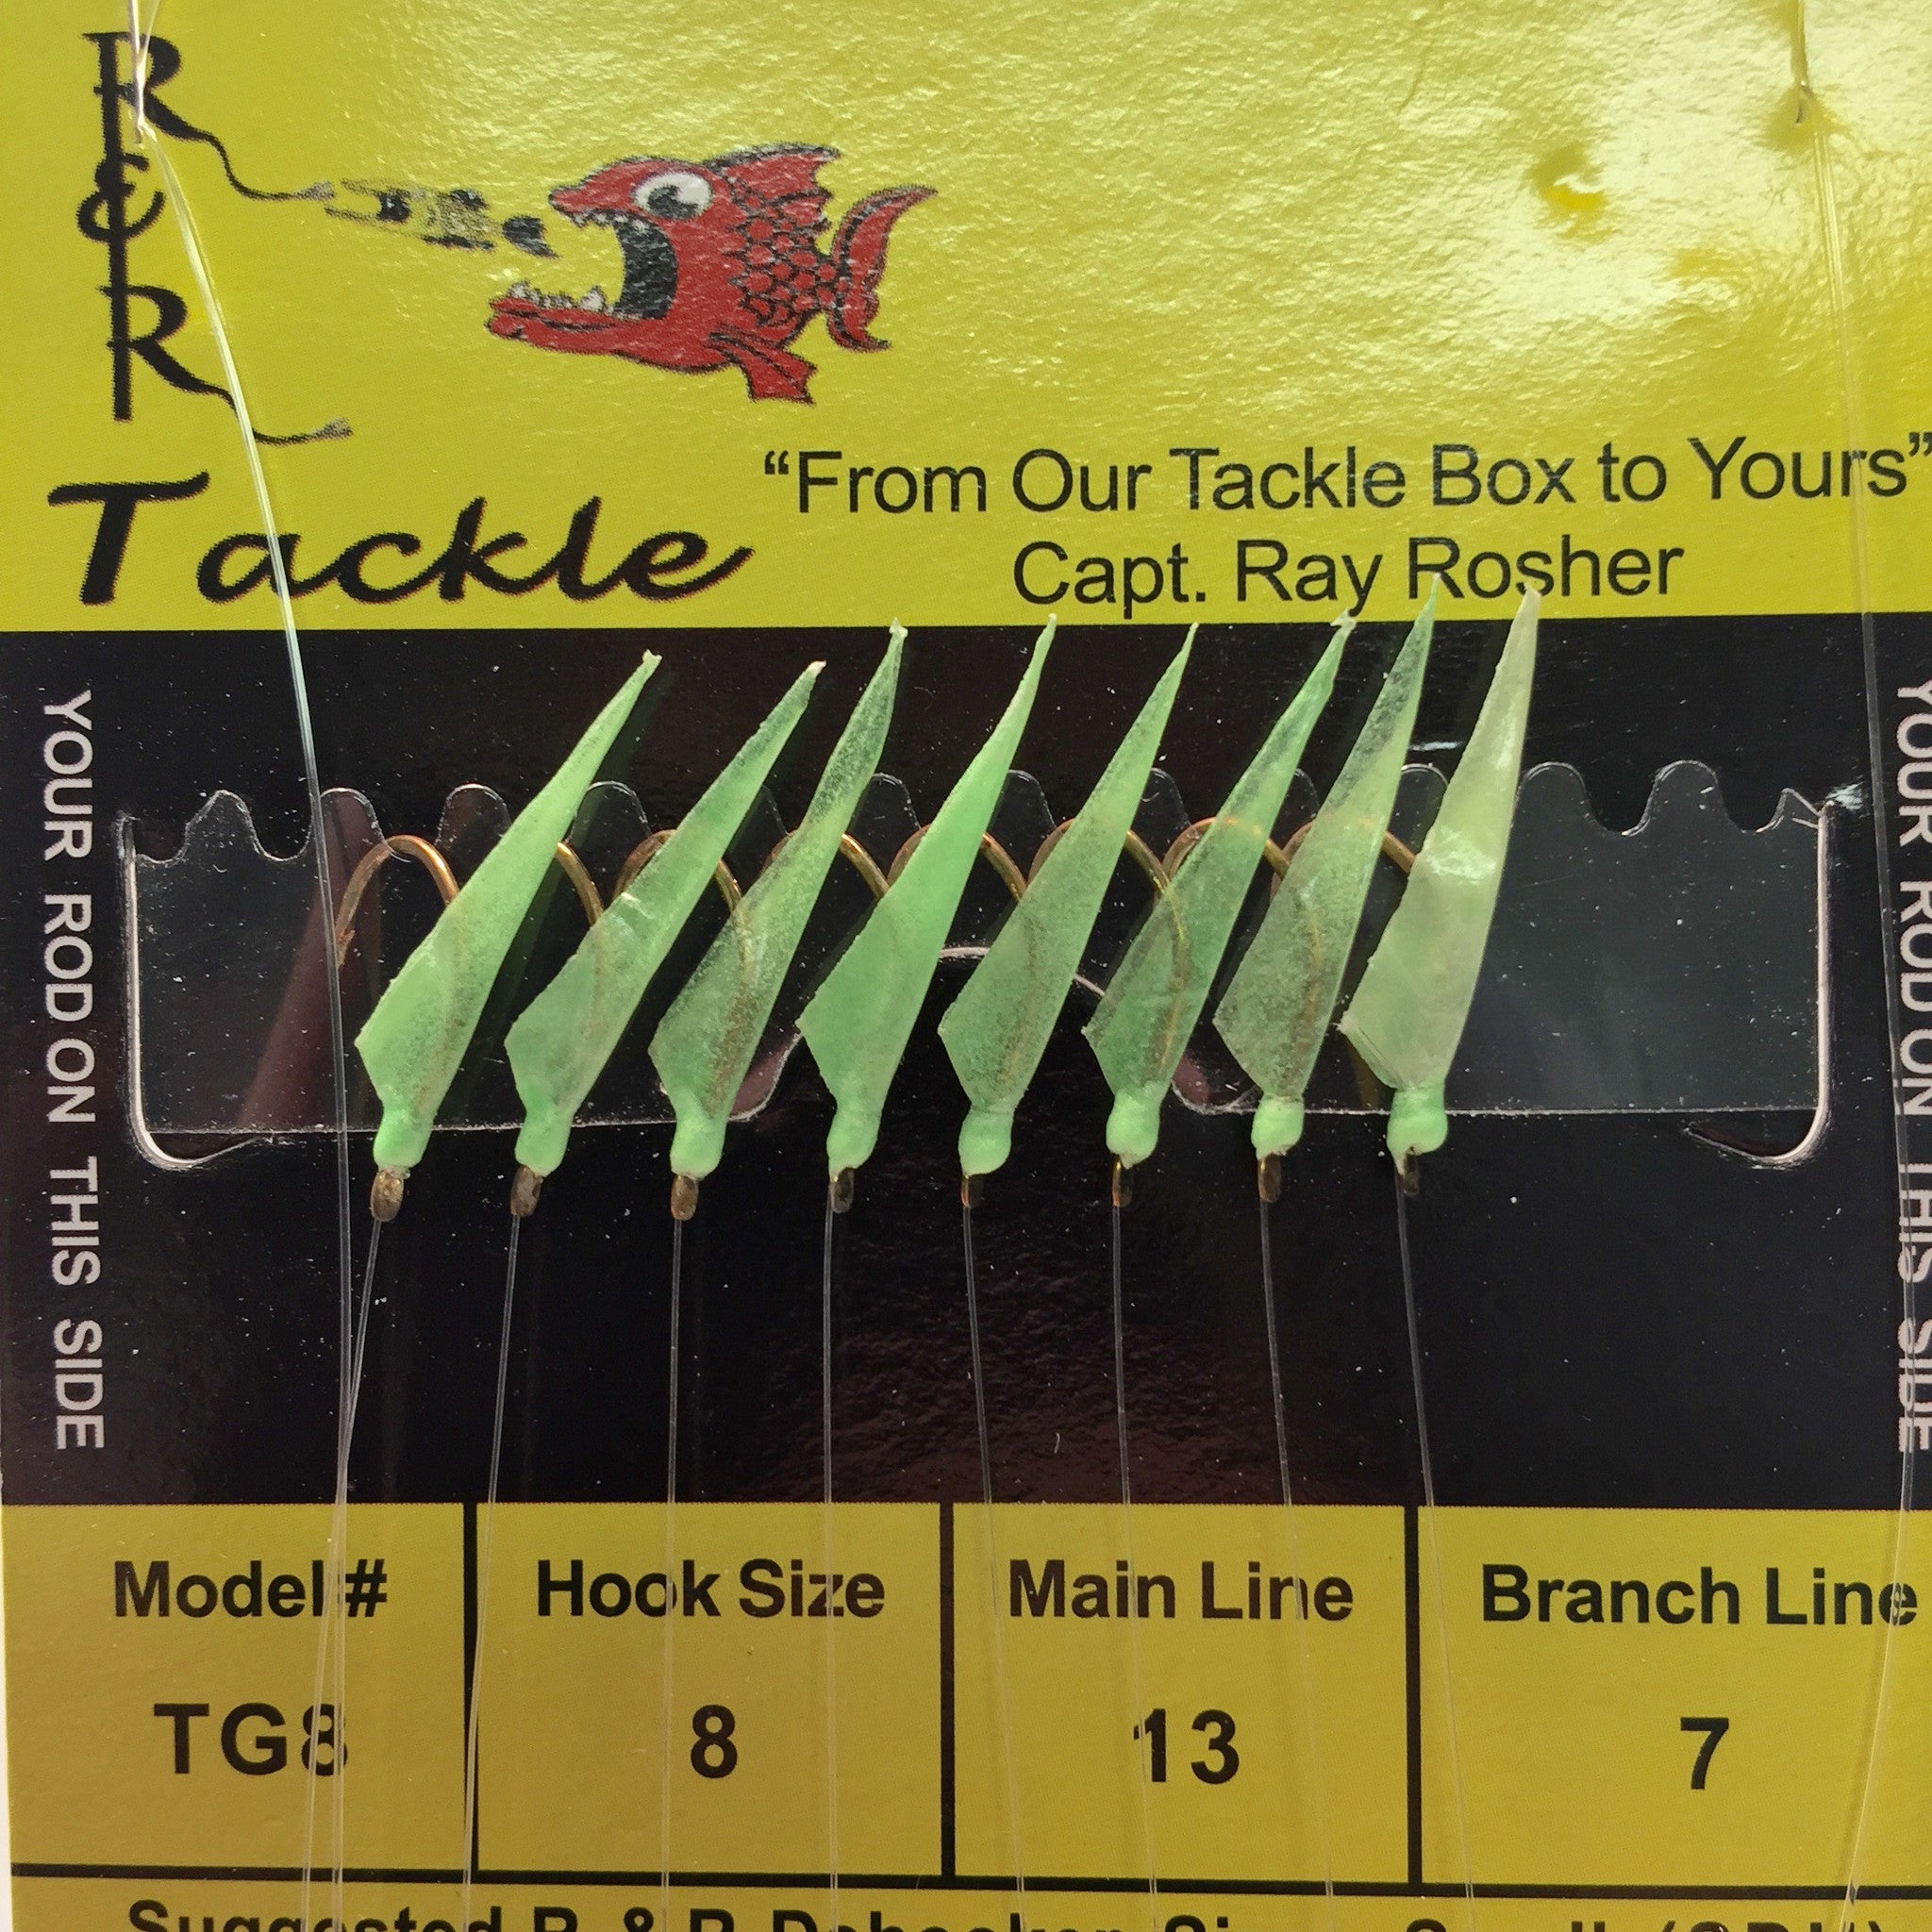 TG8 Bait Rigs - 8 (size 8) hooks with green heads & glow skin